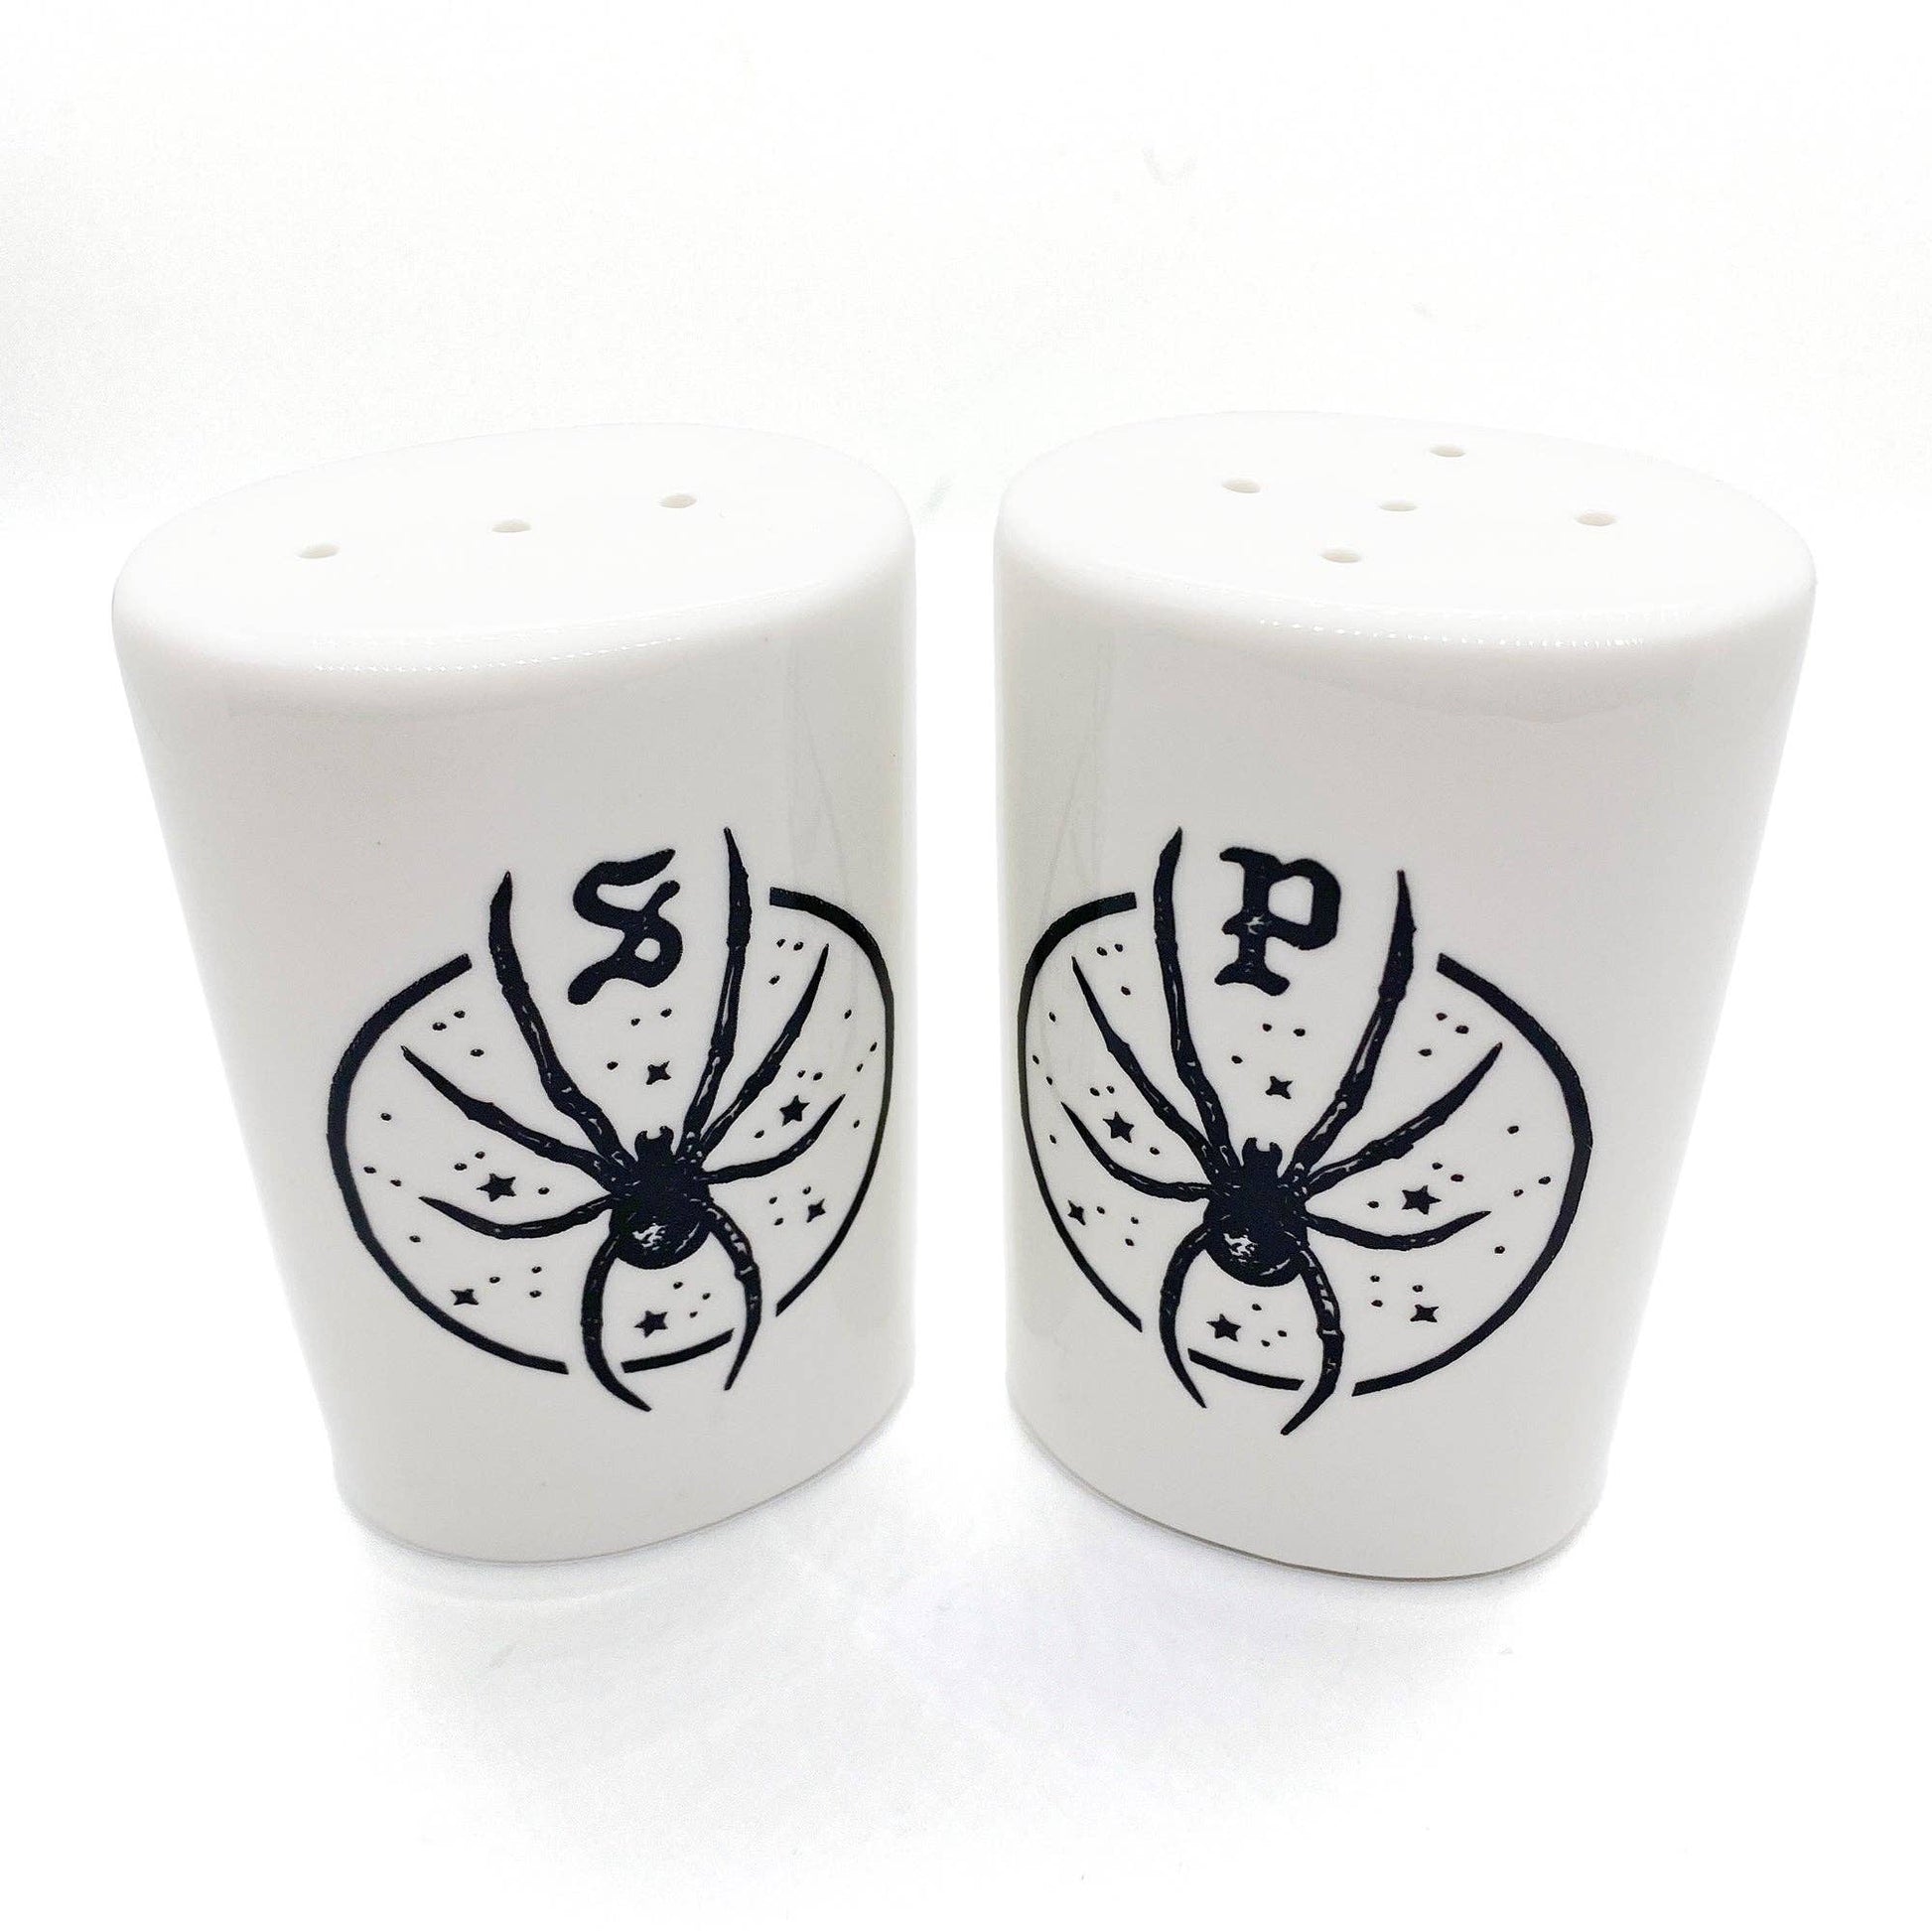 Spider Salt & Pepper Shakers | Seasoning Dispensers | Condiments Container